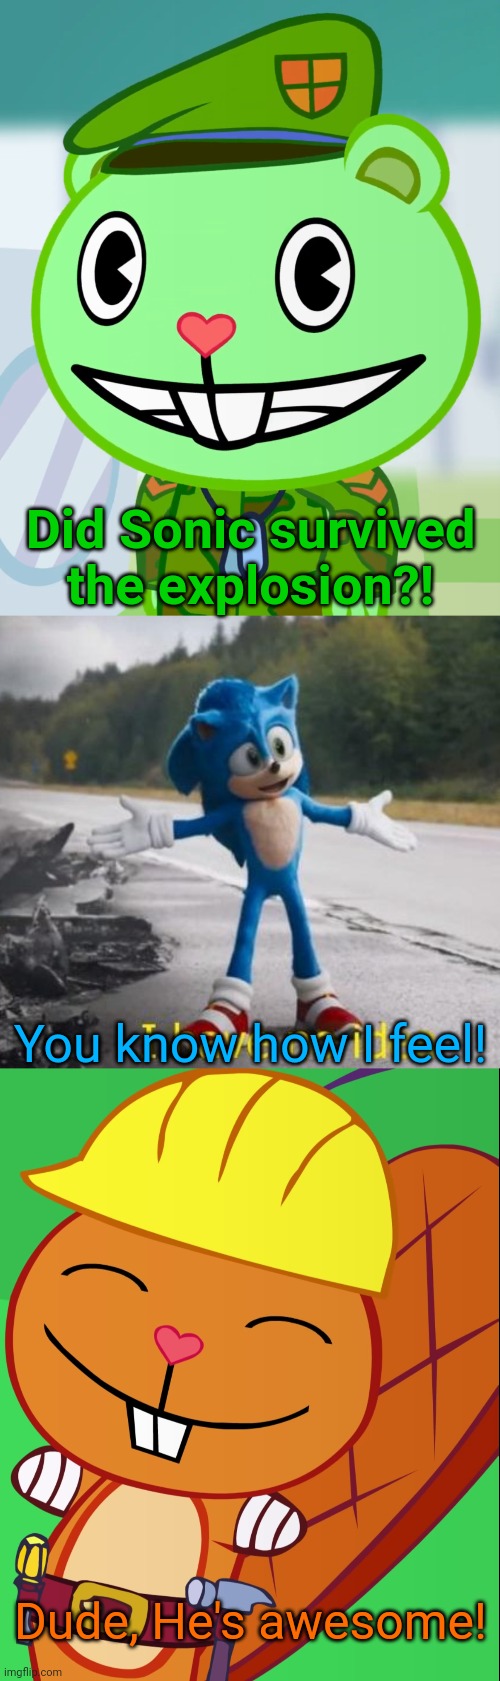 Flippy & Handy meets Sonic the Hedgehog!! | Did Sonic survived the explosion?! You know how I feel! Dude, He's awesome! | image tagged in sonic how are you not dead,flippy smiles htf,happy handy htf,crossover,memes,relatable | made w/ Imgflip meme maker